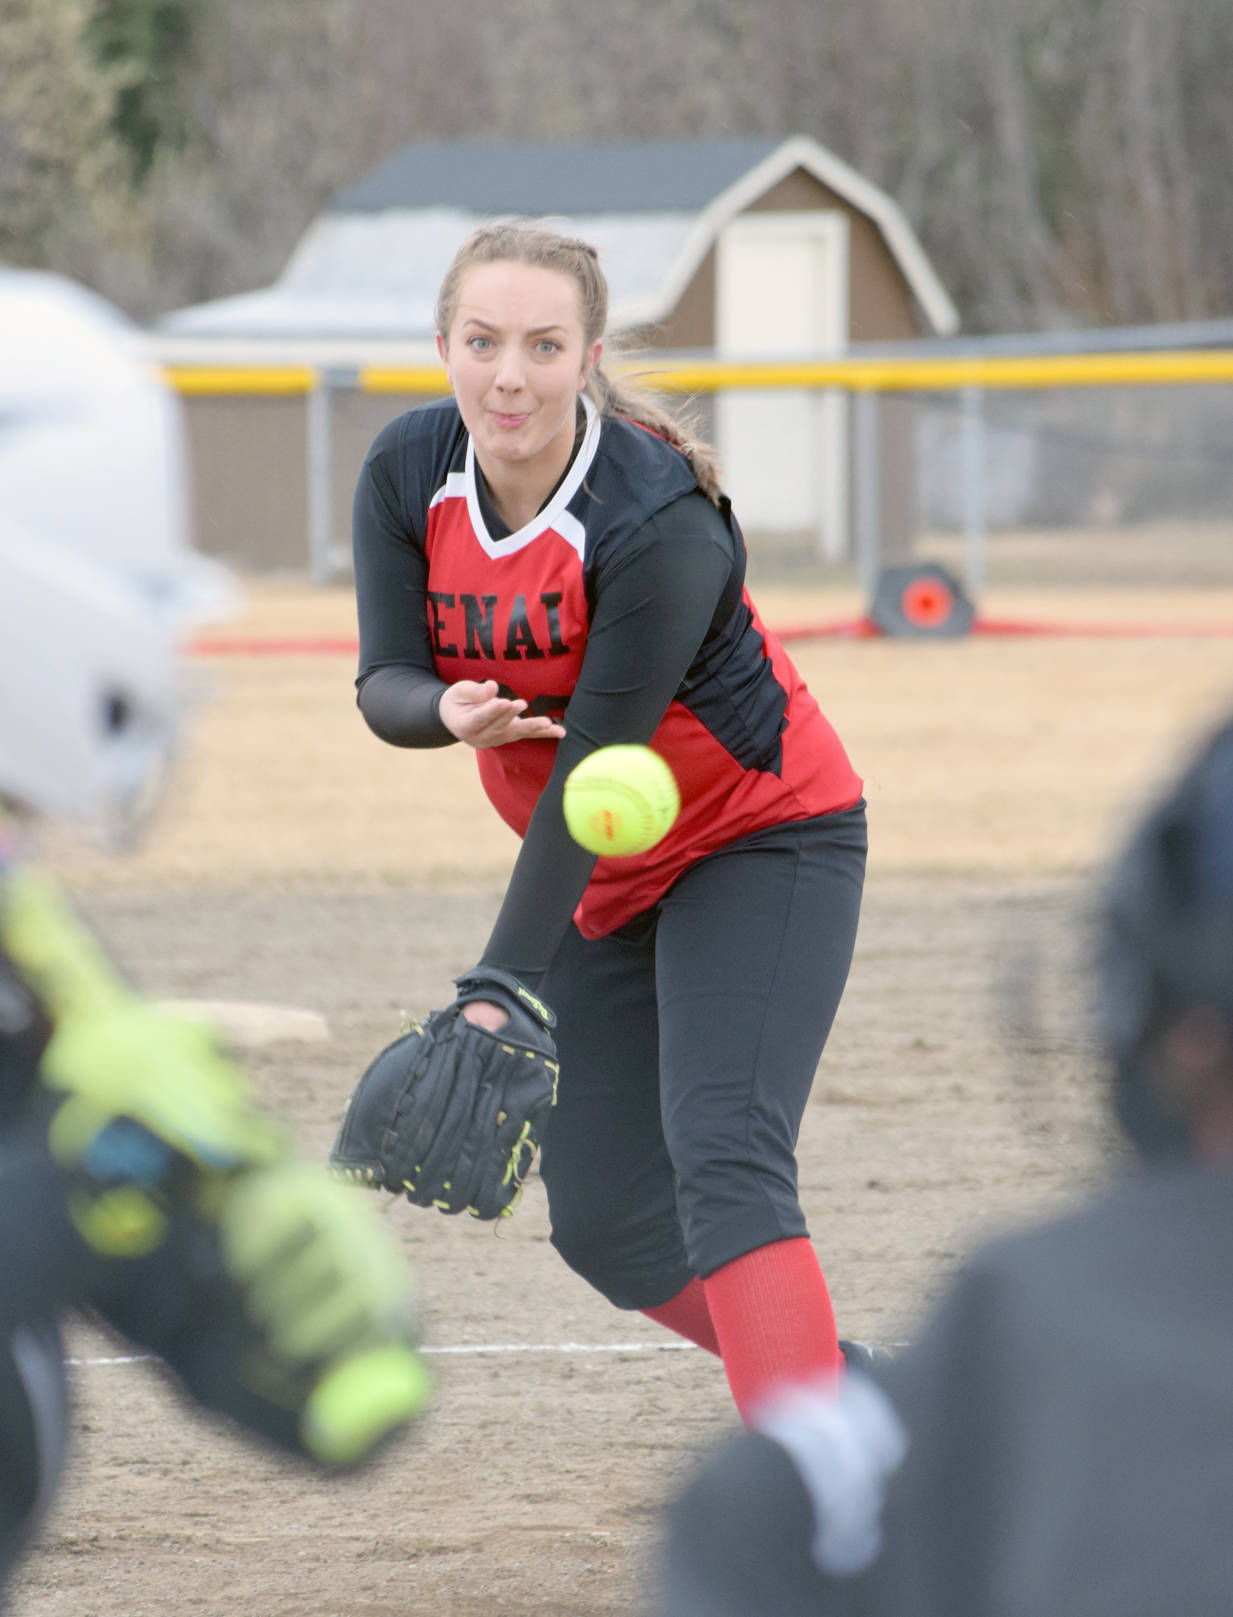 Kenai Central’s Savannah Jones delivers a pitch against Soldotna in the top of the first inning Thursday, May 3, 2018, at the Steve Shearer Memorial Ball Park in Kenai.